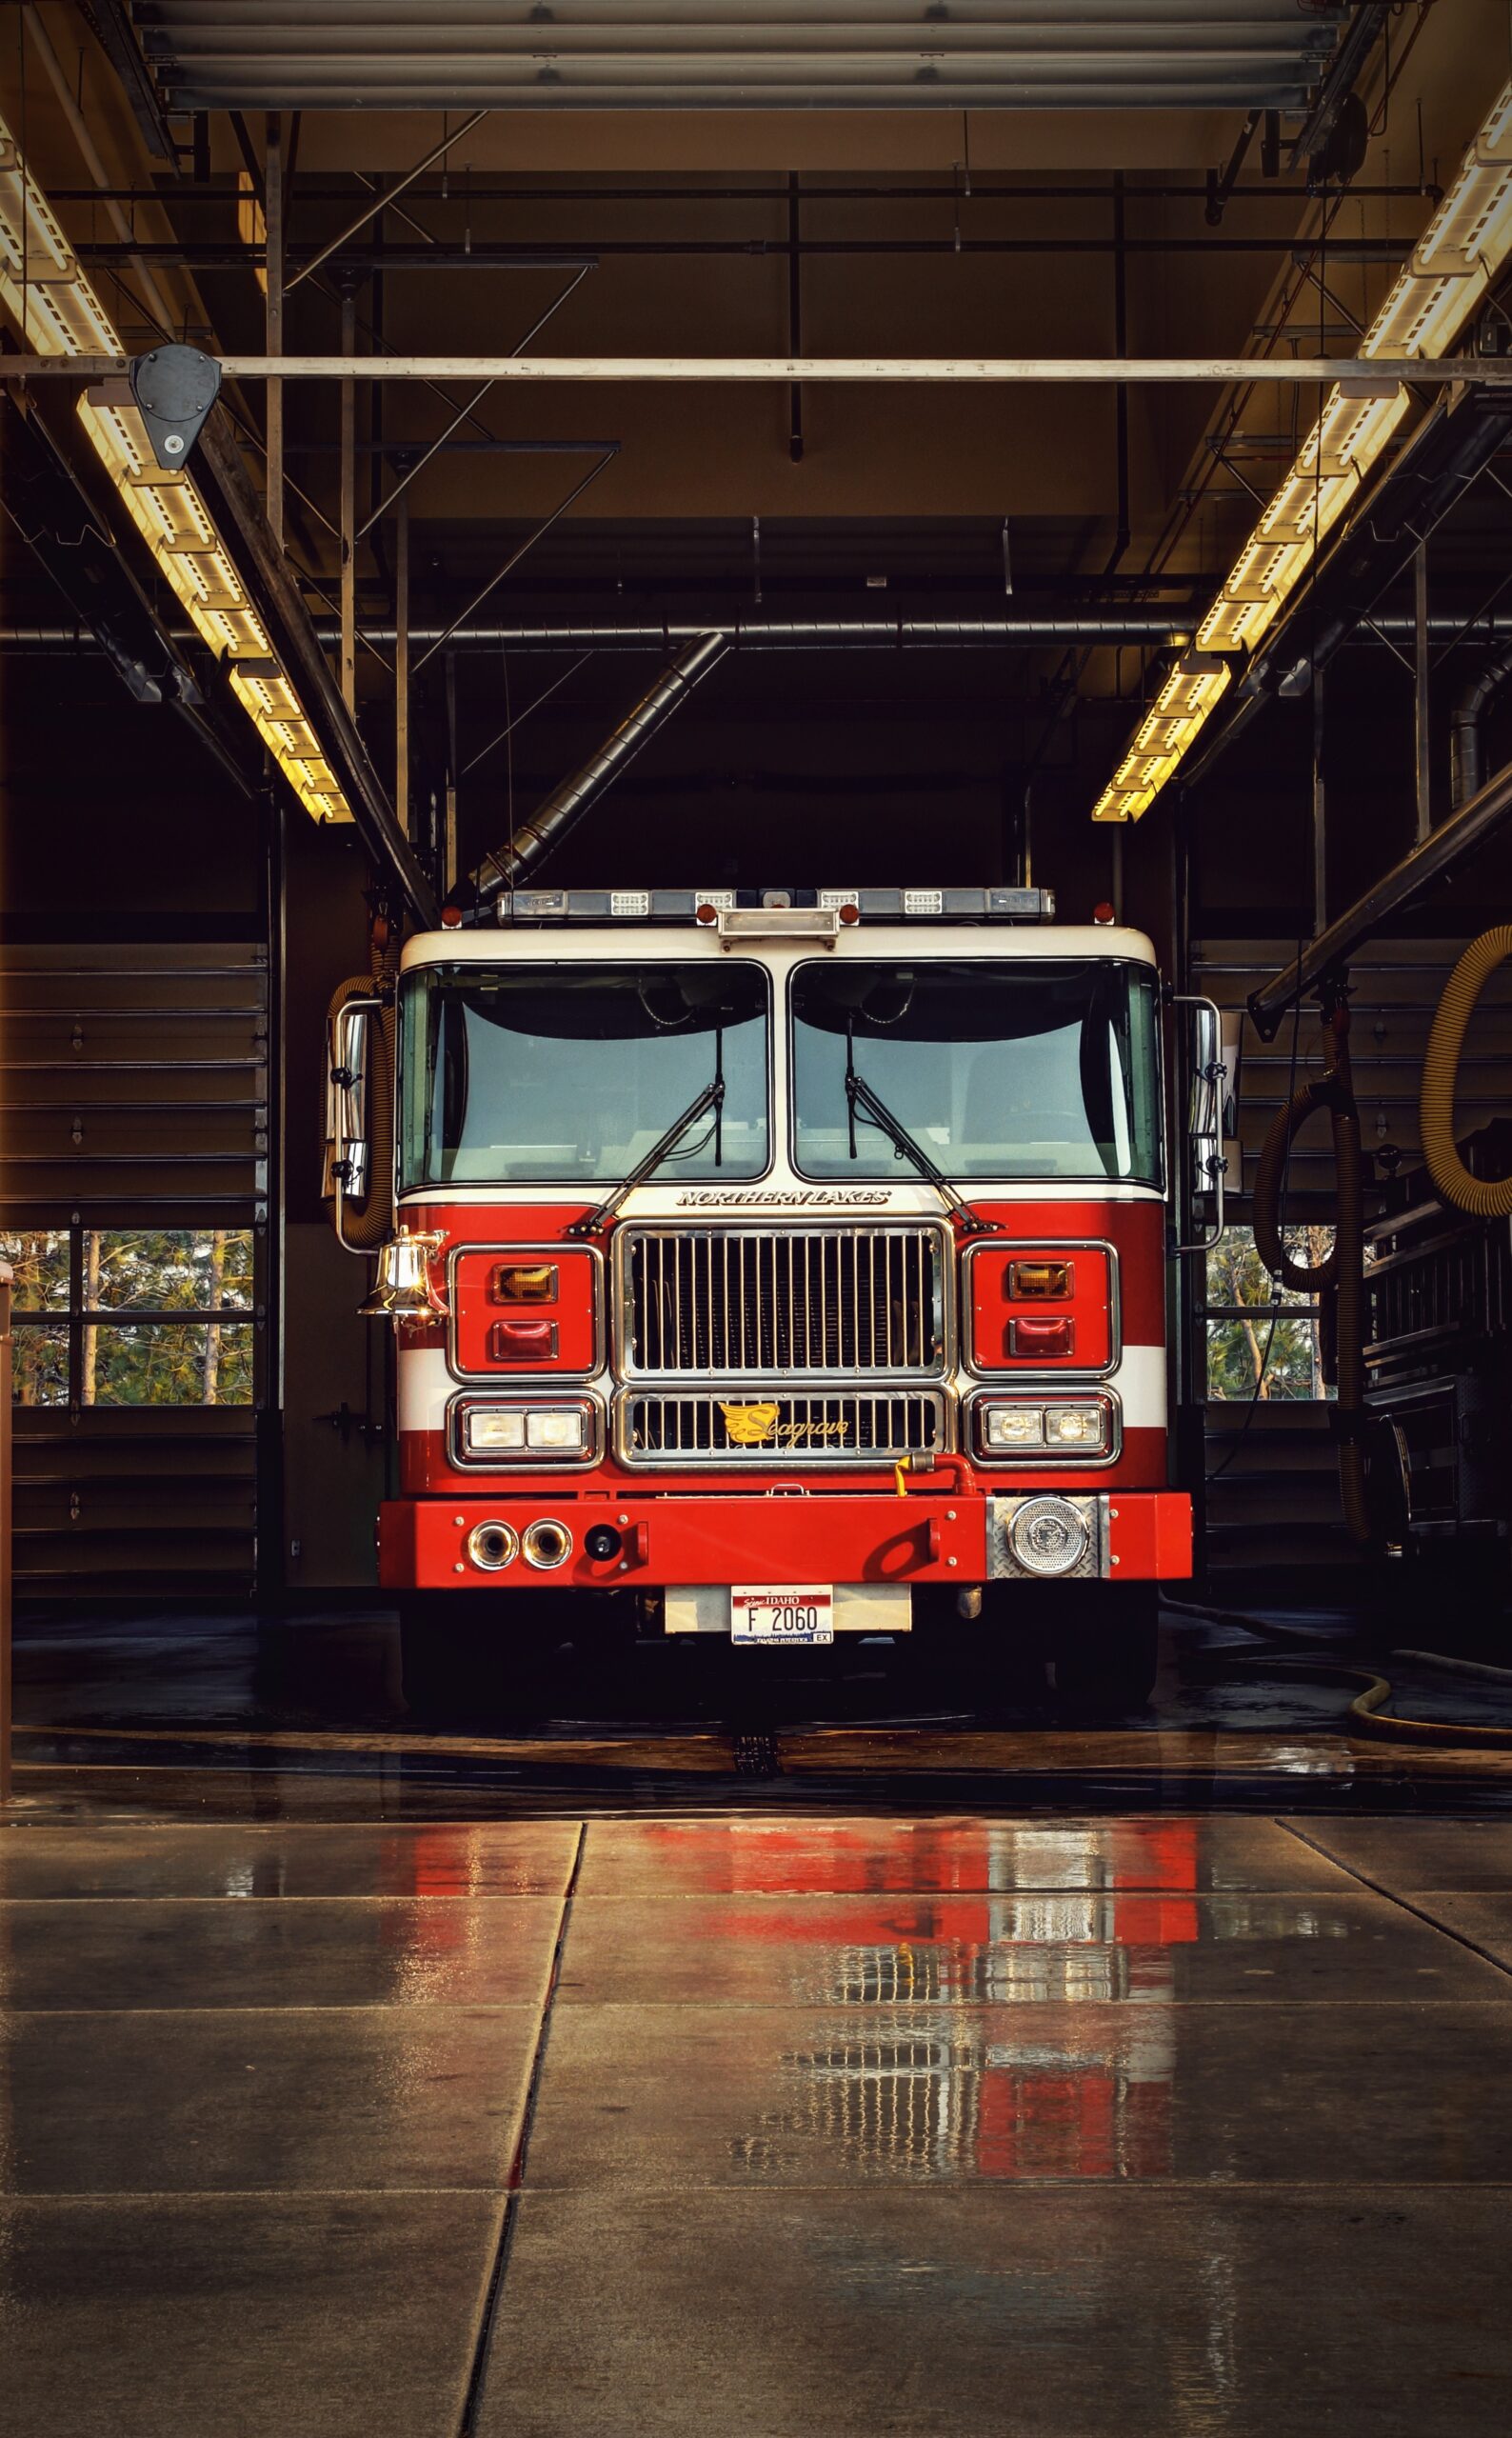 Picture of a fire truck with high graphic